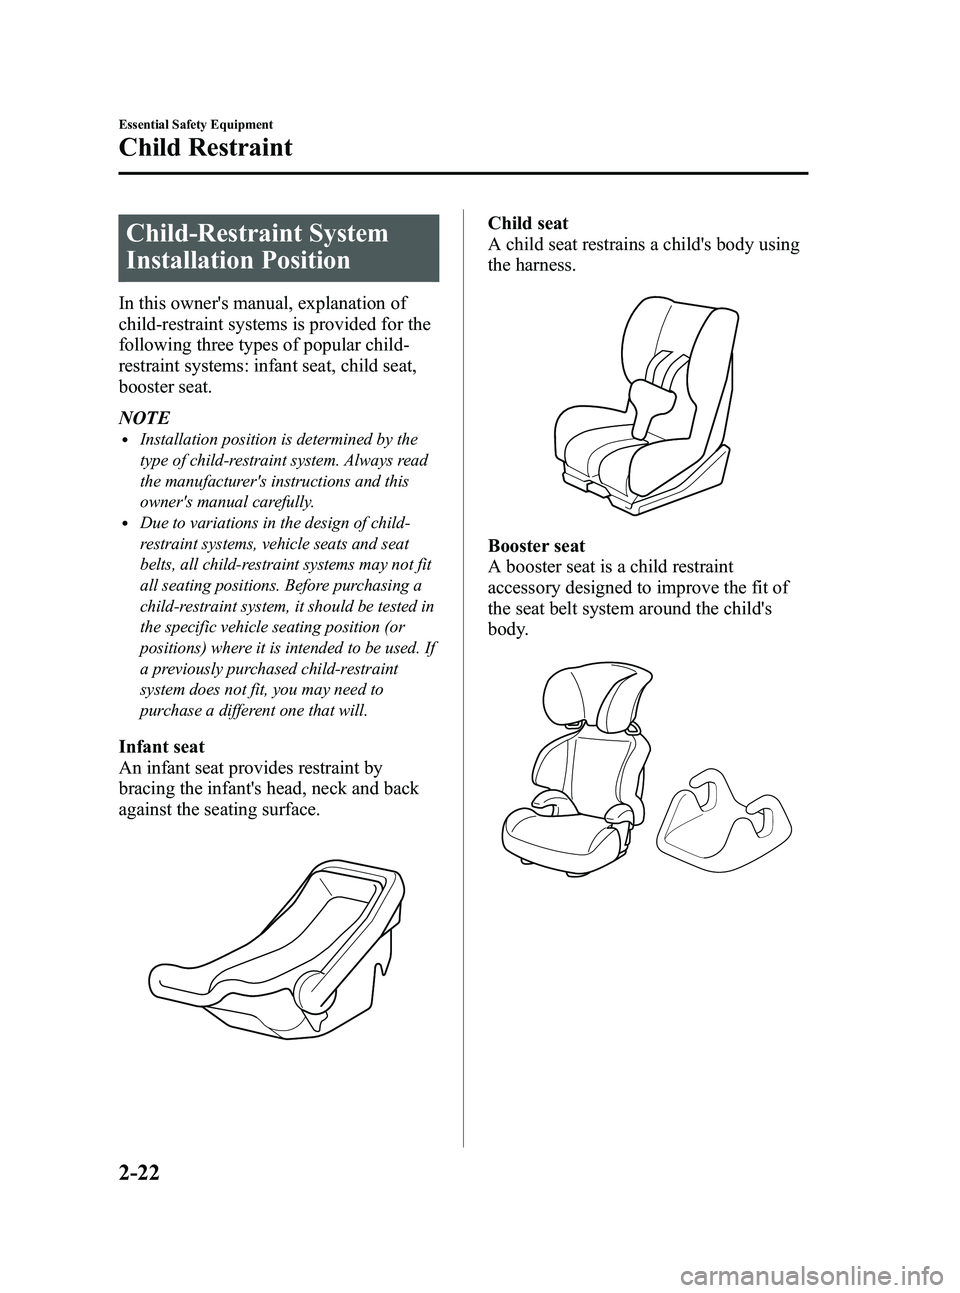 MAZDA MODEL MX-5 MIATA PRHT 2013 Owners Guide Black plate (34,1)
Child-Restraint System
Installation Position
In this owners manual, explanation of
child-restraint systems is provided for the
following three types of popular child-
restraint sys